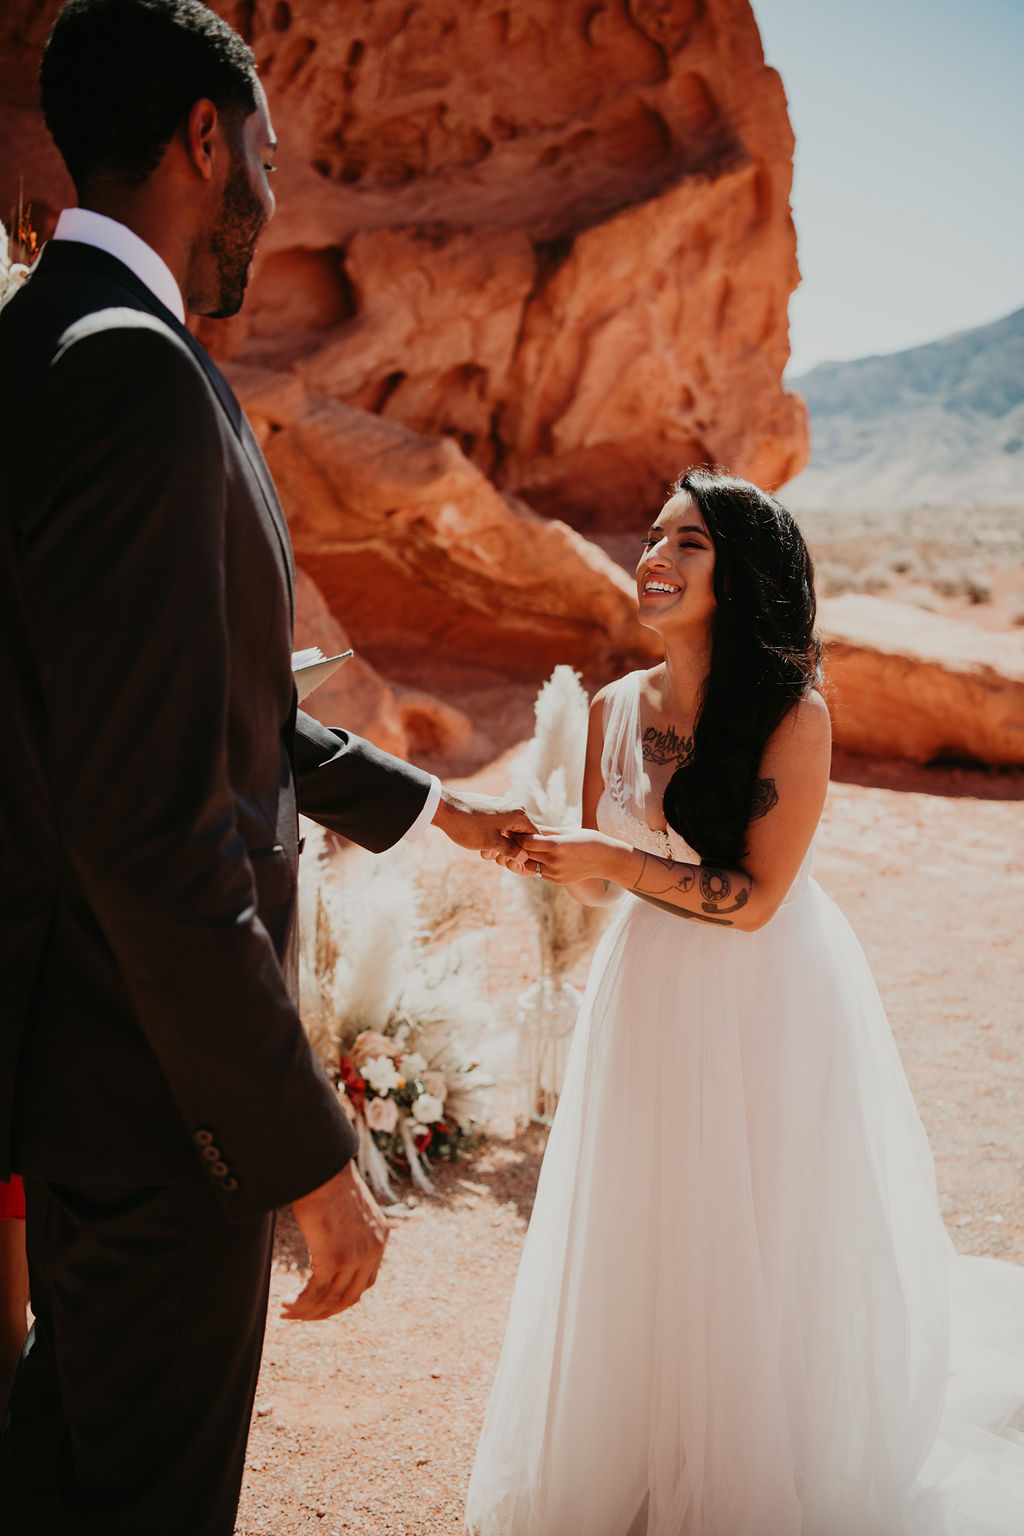 Bride Smiling and Laughing Wile Putting Ring on Grooms Finger in Off the Strip Las Vegas Wedding